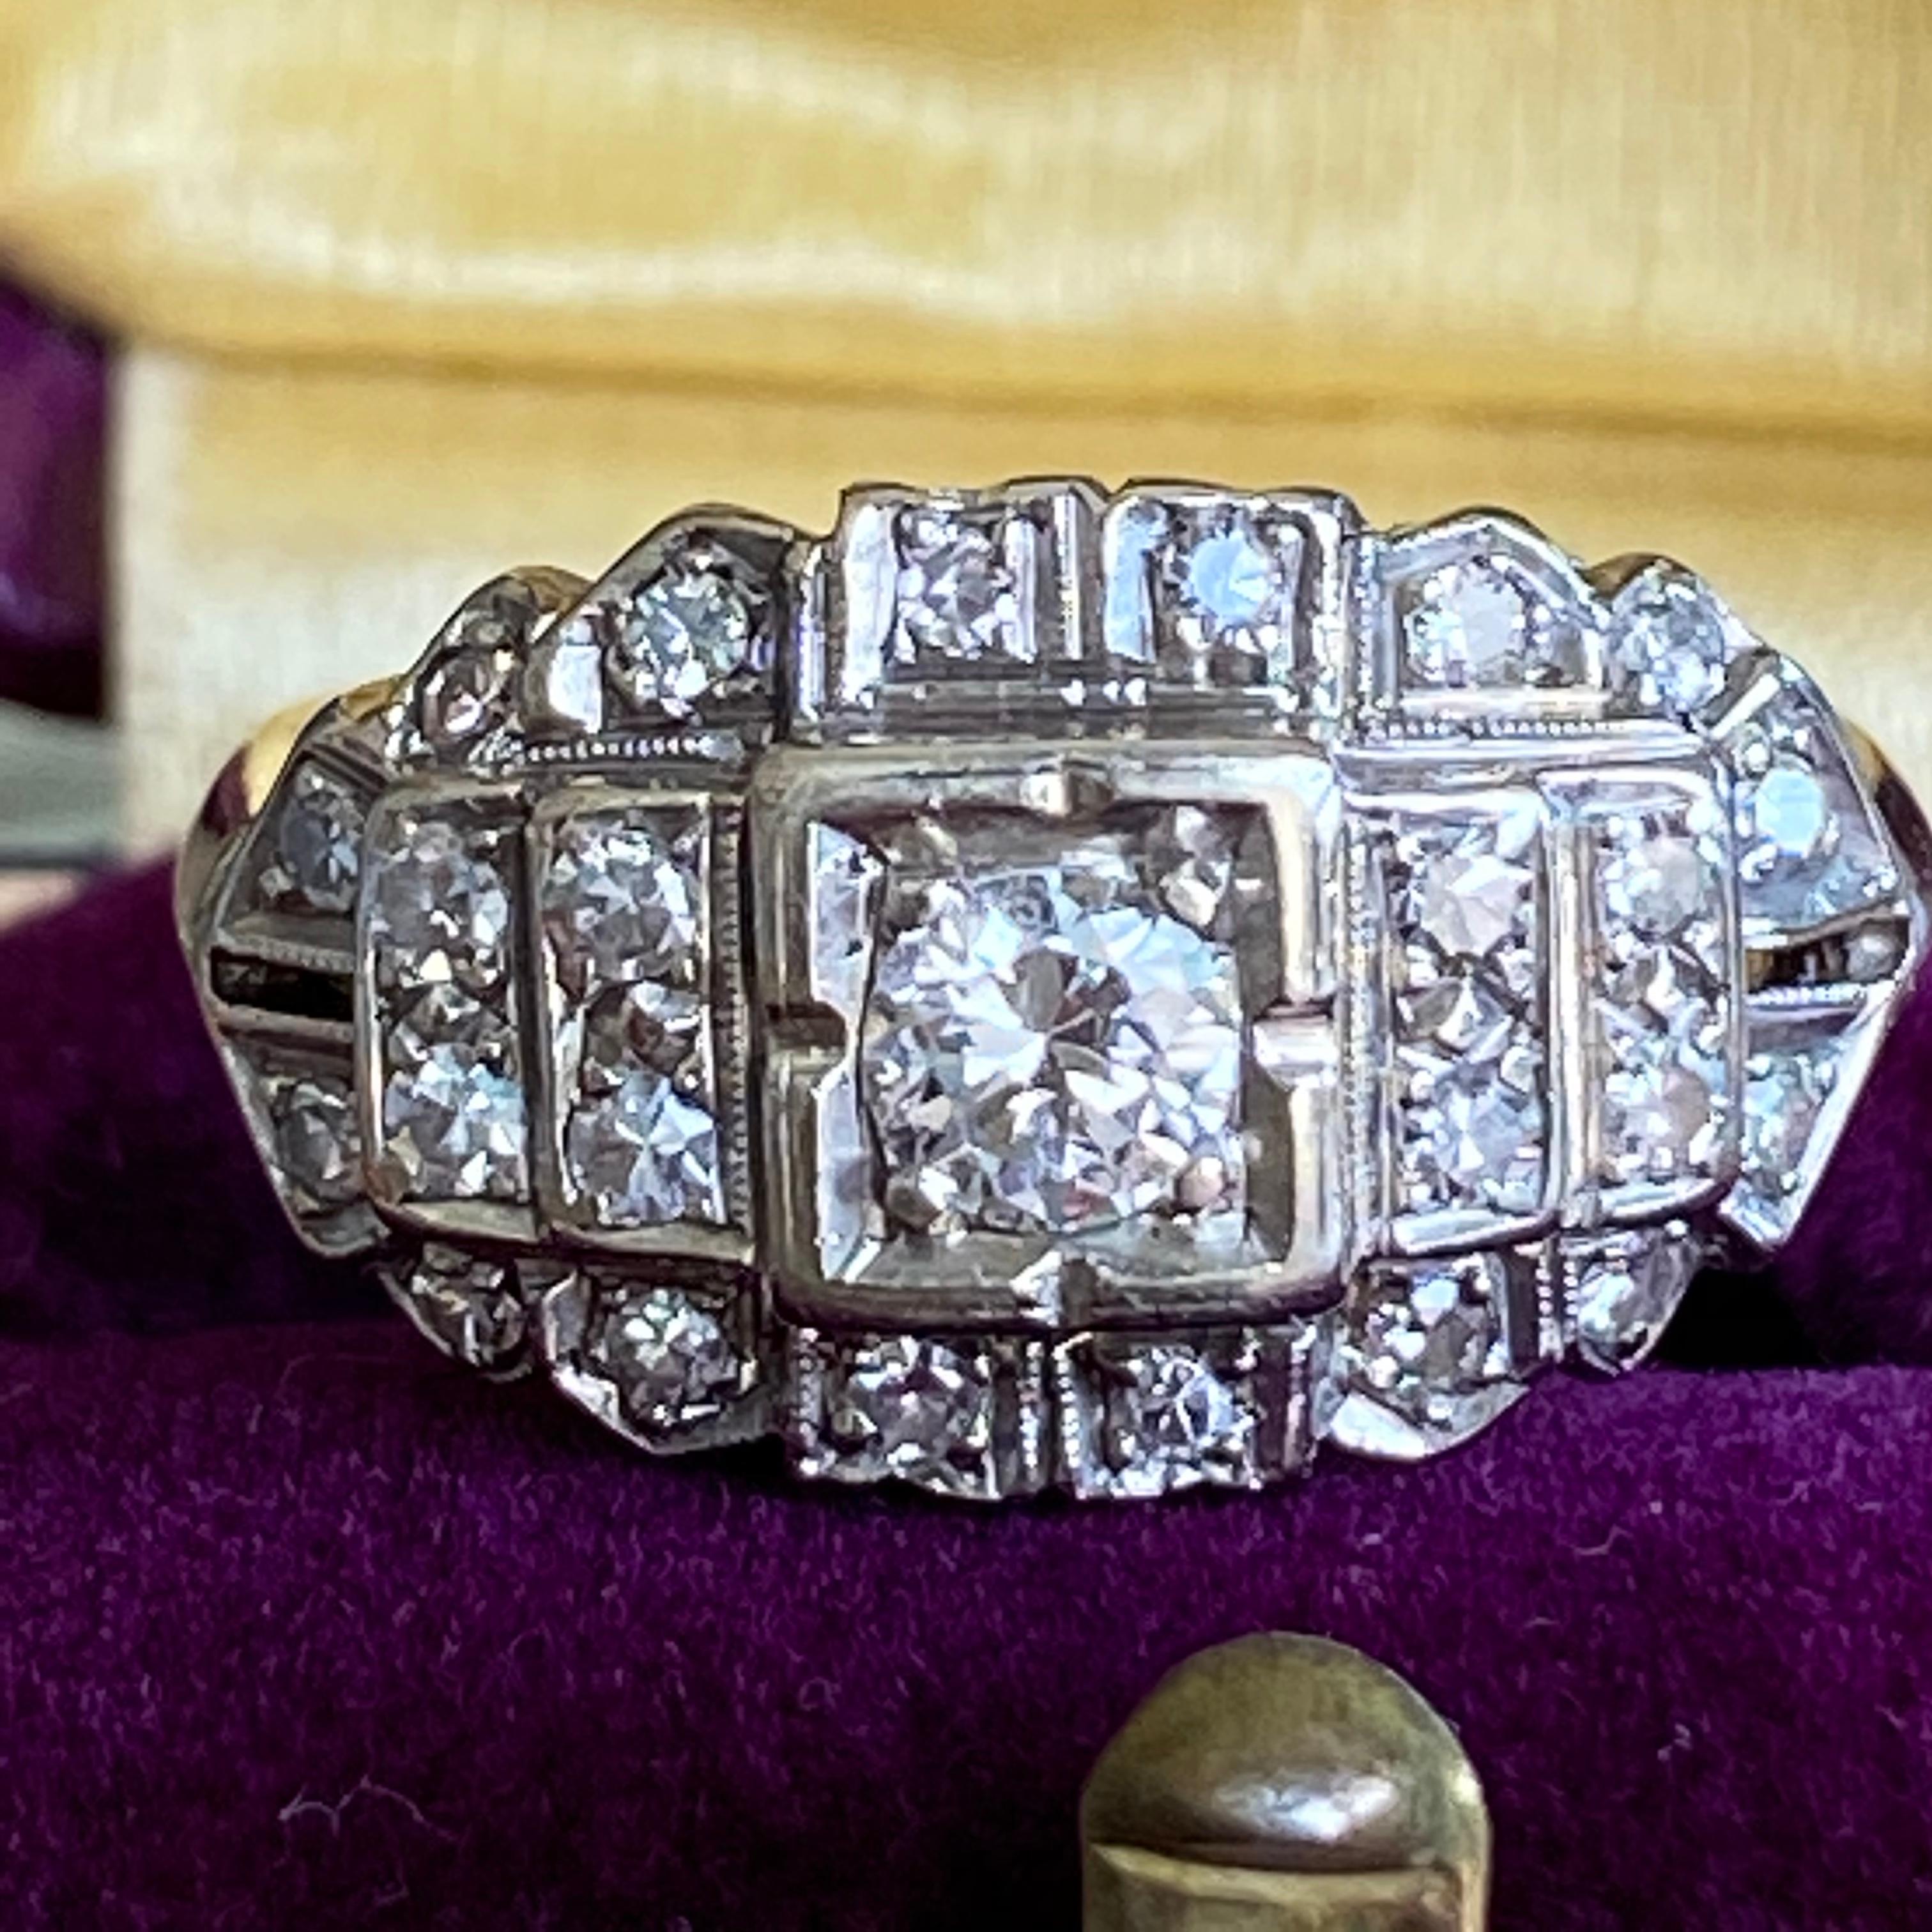 Details:
Sweet 1940's .49ct diamond (total carat weight) ring set in 14K yellow & white gold. This would make a lovely engagement ring! This ring comes with an appraisal. You will not be disappointed! Please ask all necessary questions prior to